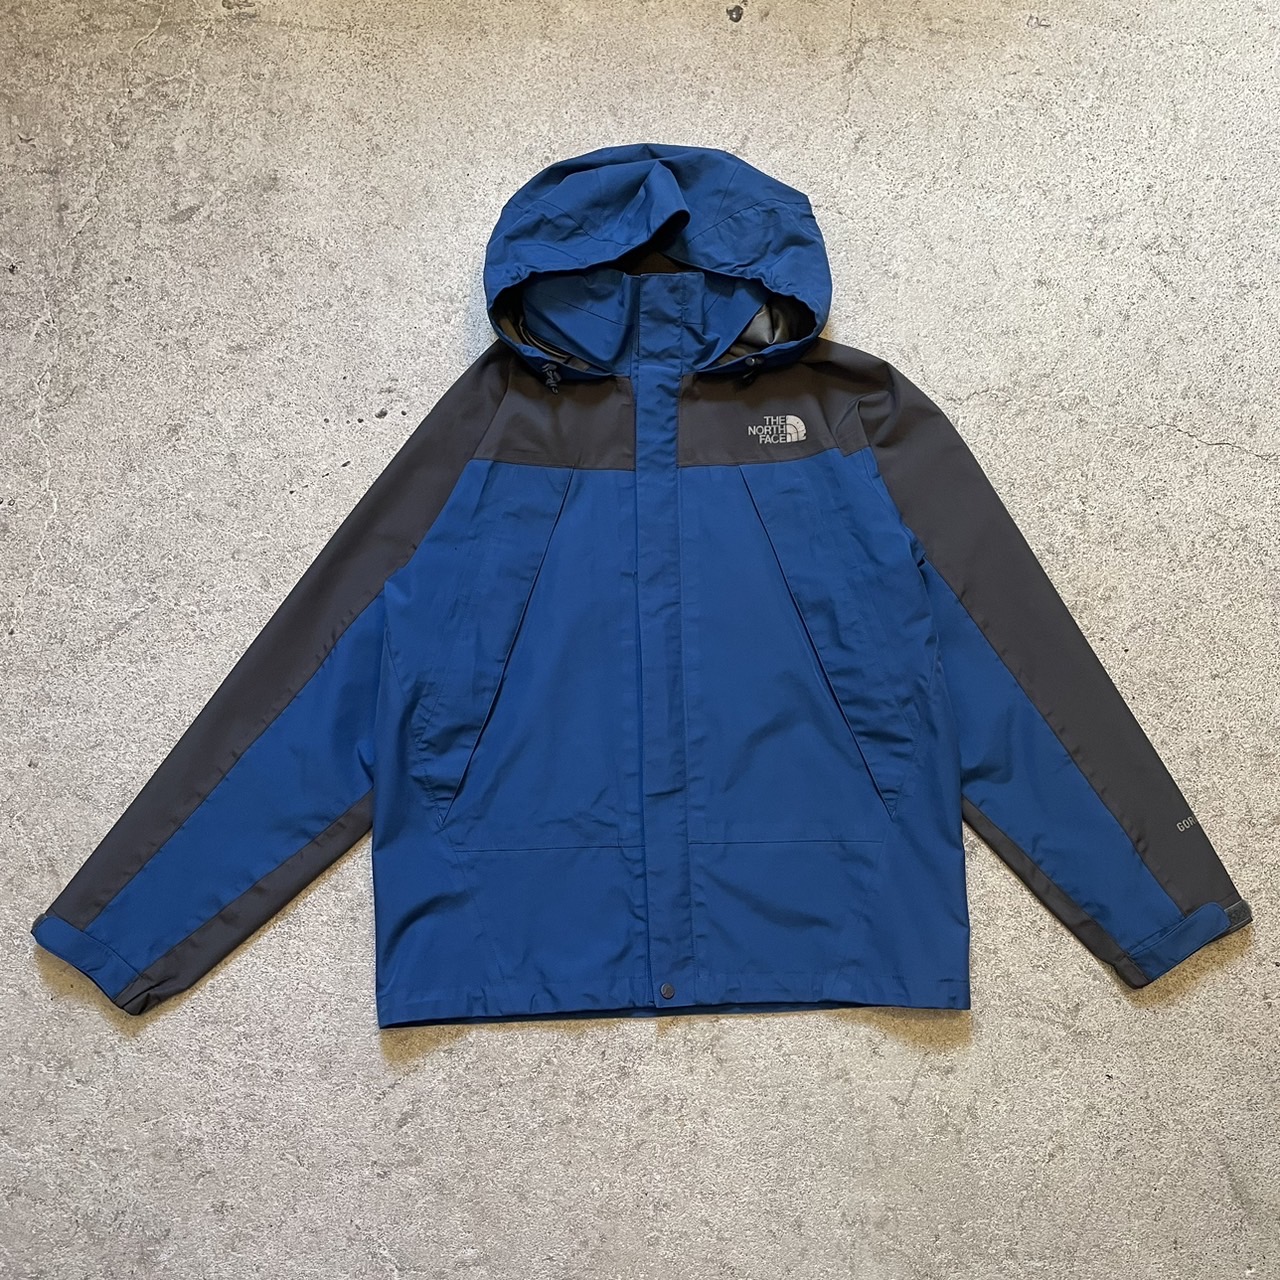 's THE NORTH FACE Mountain Light Jacket   Vintage.City